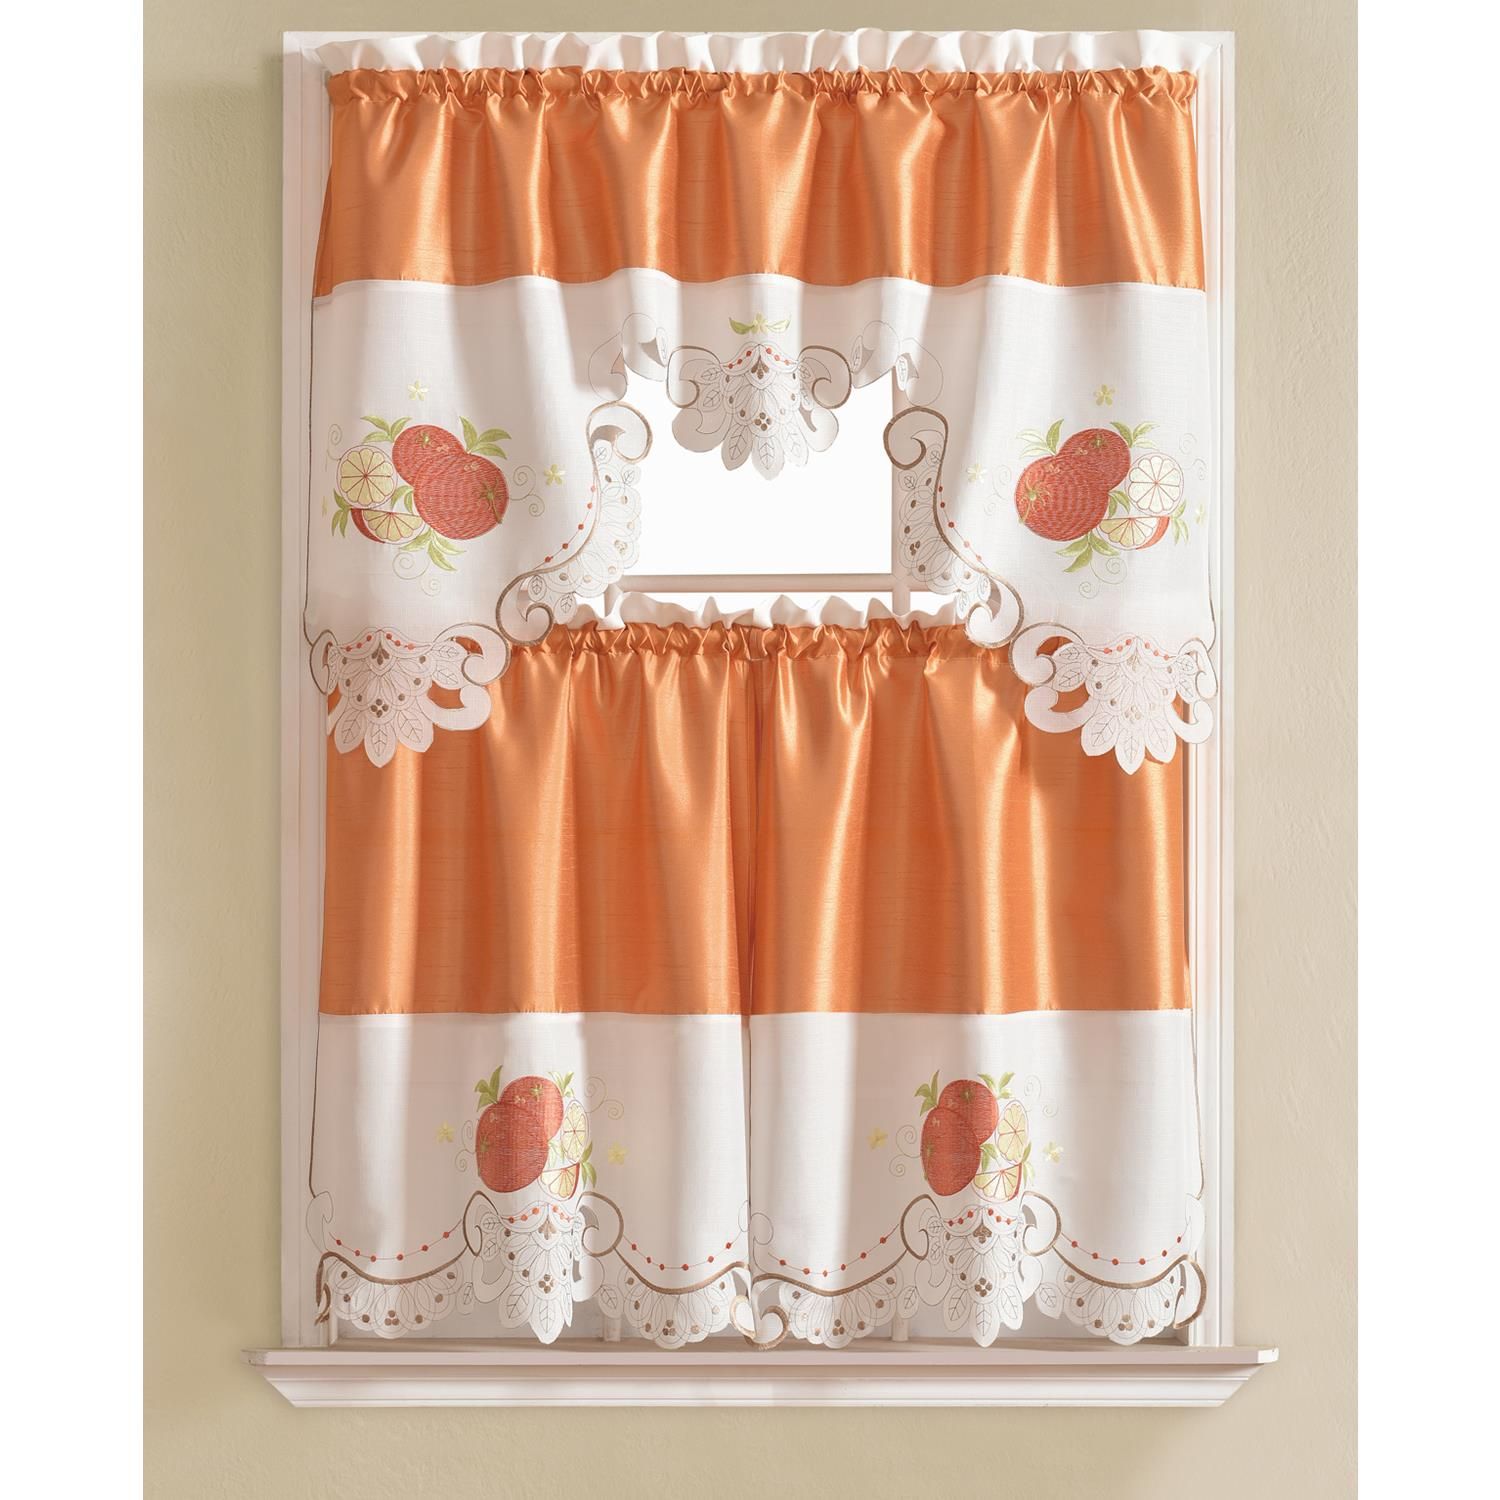 Details About Noble Embroidered Orange Tier And Valance Kitchen Curtain Set Throughout Urban Embroidered Tier And Valance Kitchen Curtain Tier Sets (View 4 of 20)